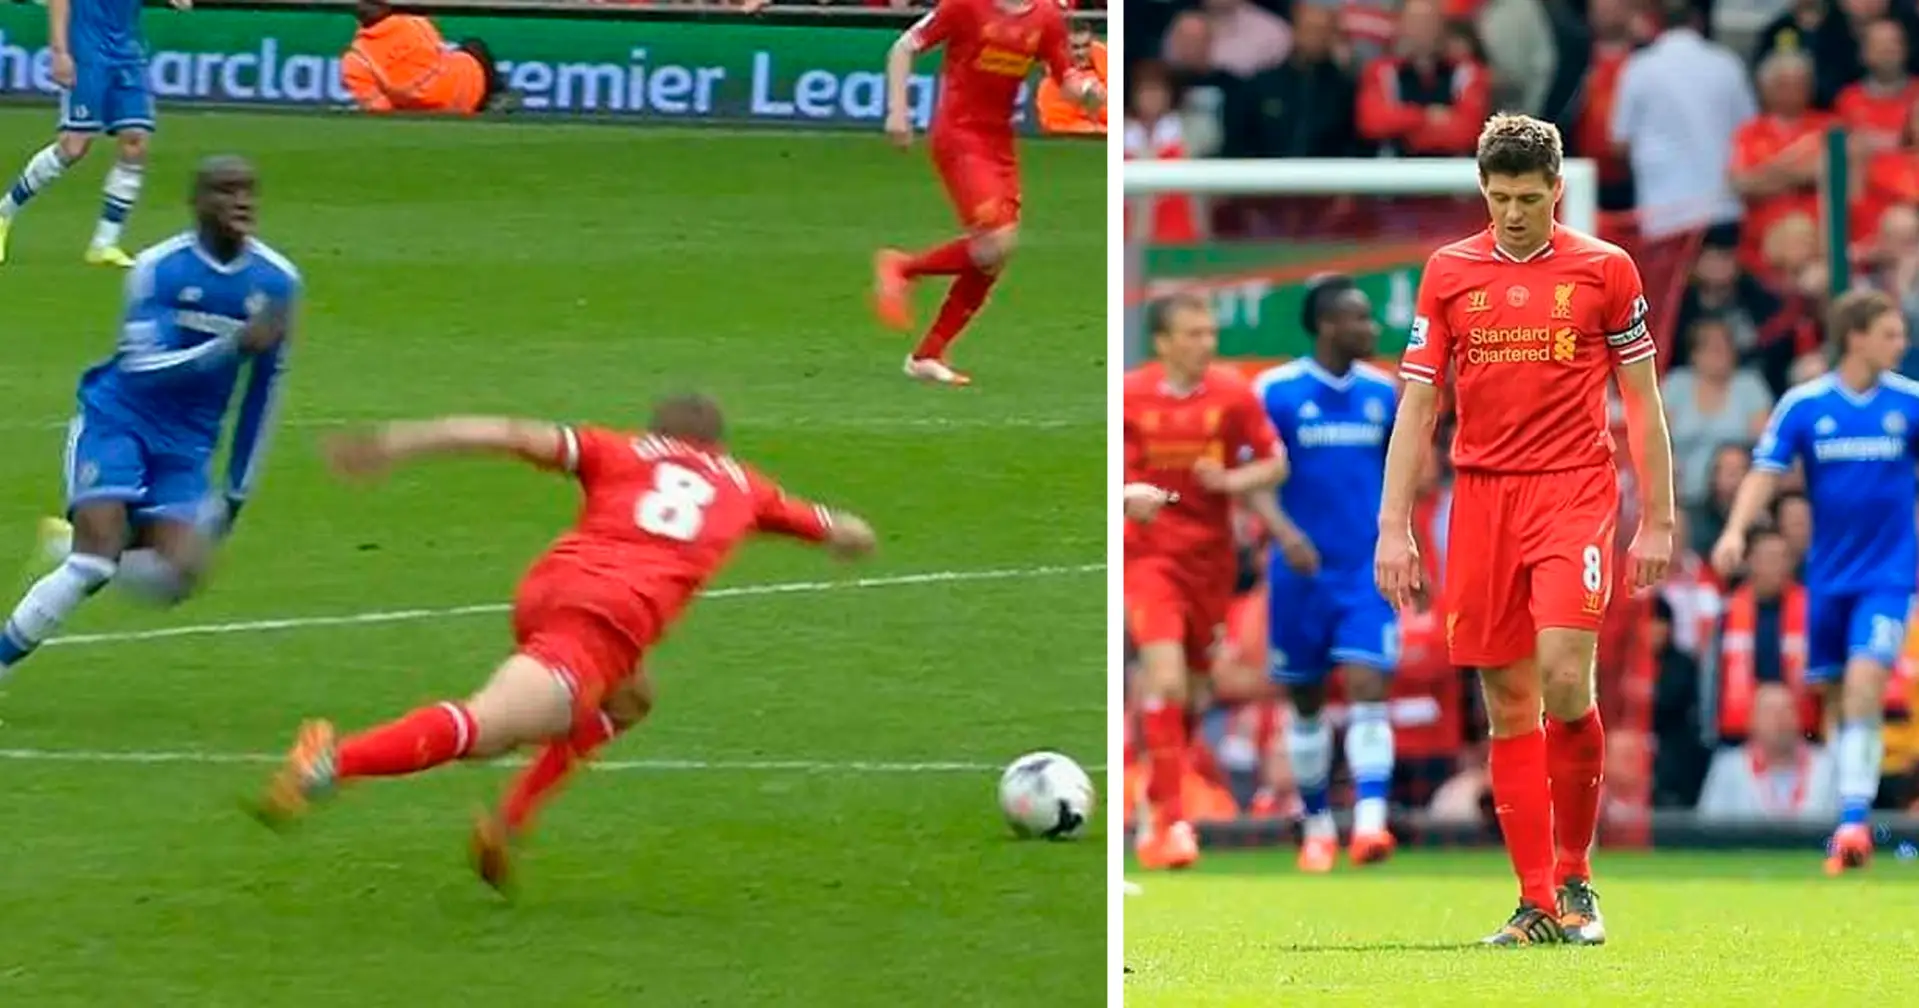 On this day 10 years ago, Gerrard's fateful slip against Chelsea happened: what Rodgers said to Stevie after it